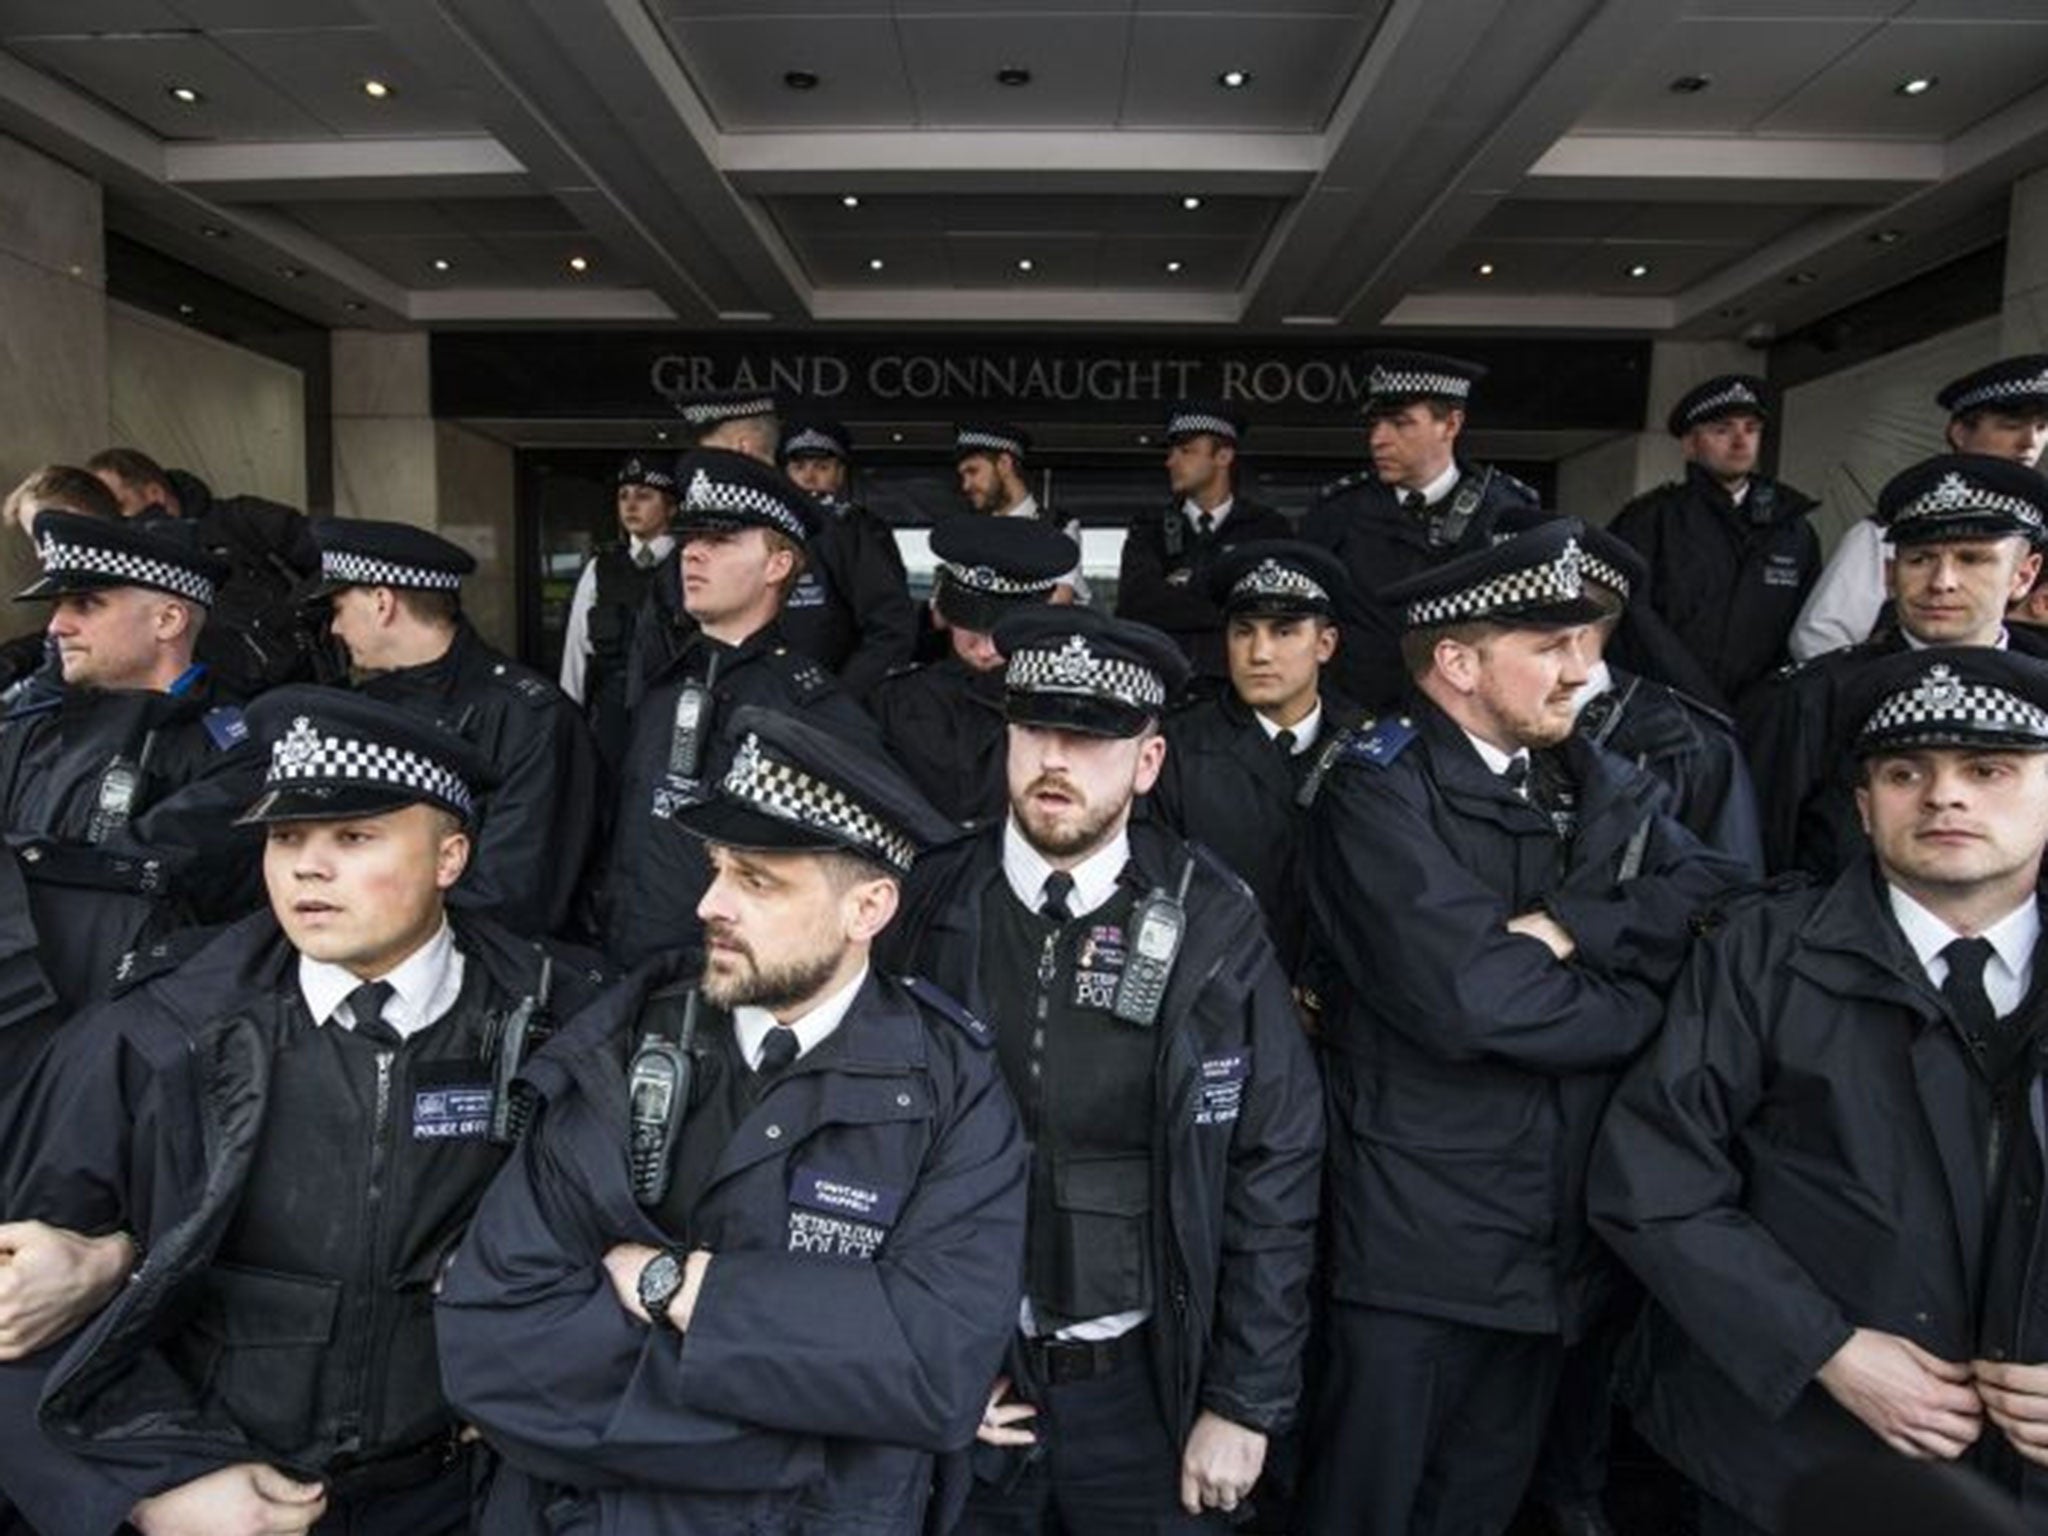 Police form a cordon around the Grand Connaught Rooms where the Tory Spring Conference is being held today as protesters gather for the 'David Cameron: close tax loopholes or resign!' demonstration